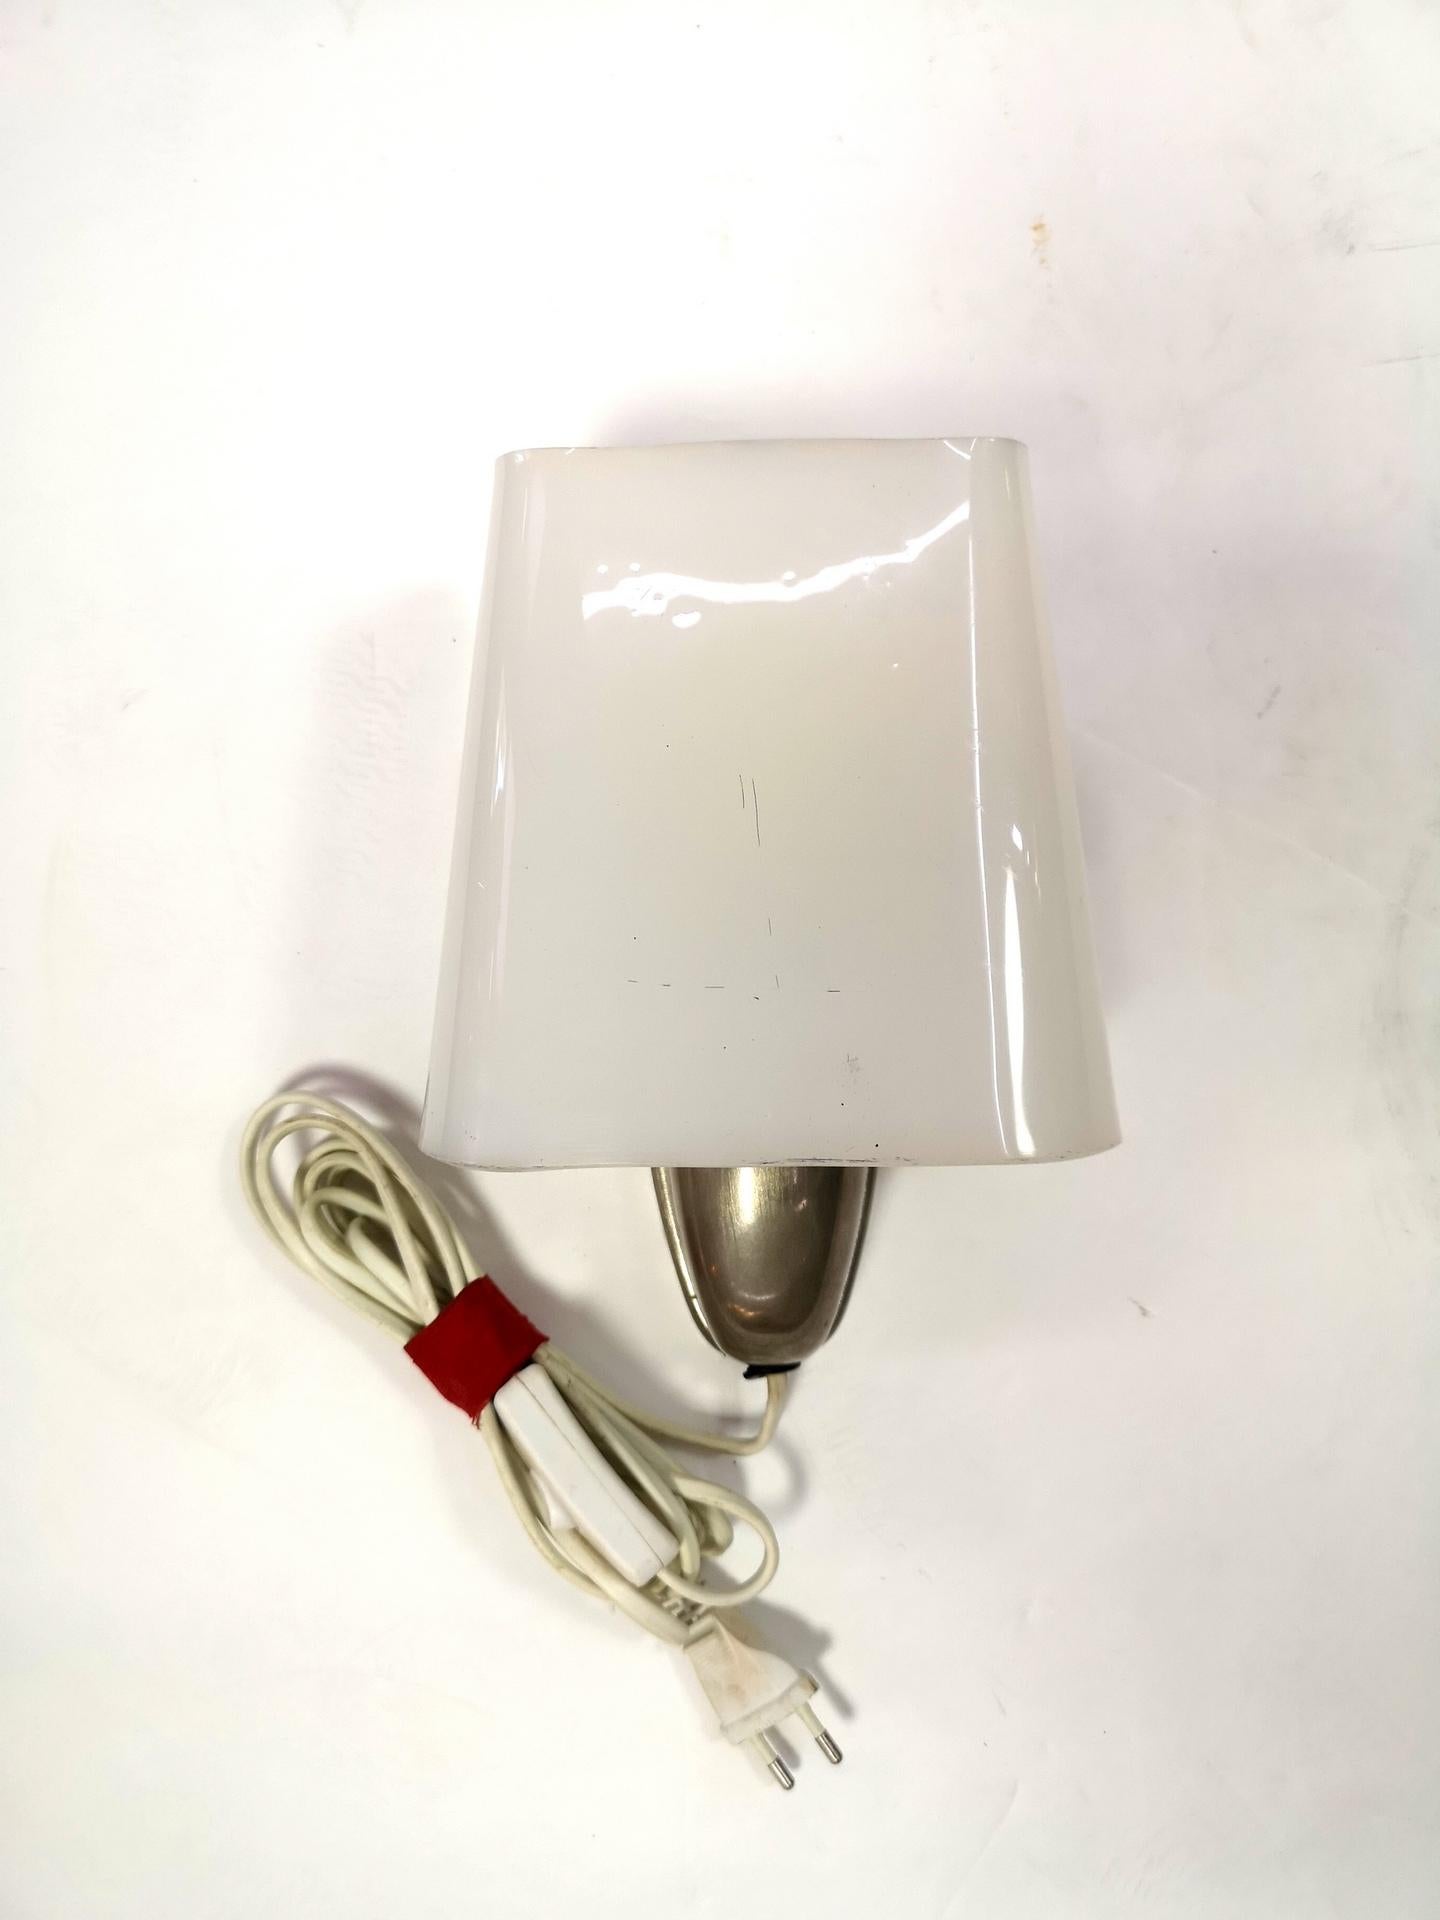 Plastic body and aluminium base, this socialist style wall lamp is in authentic condition, and was made in the USSR in 1967.